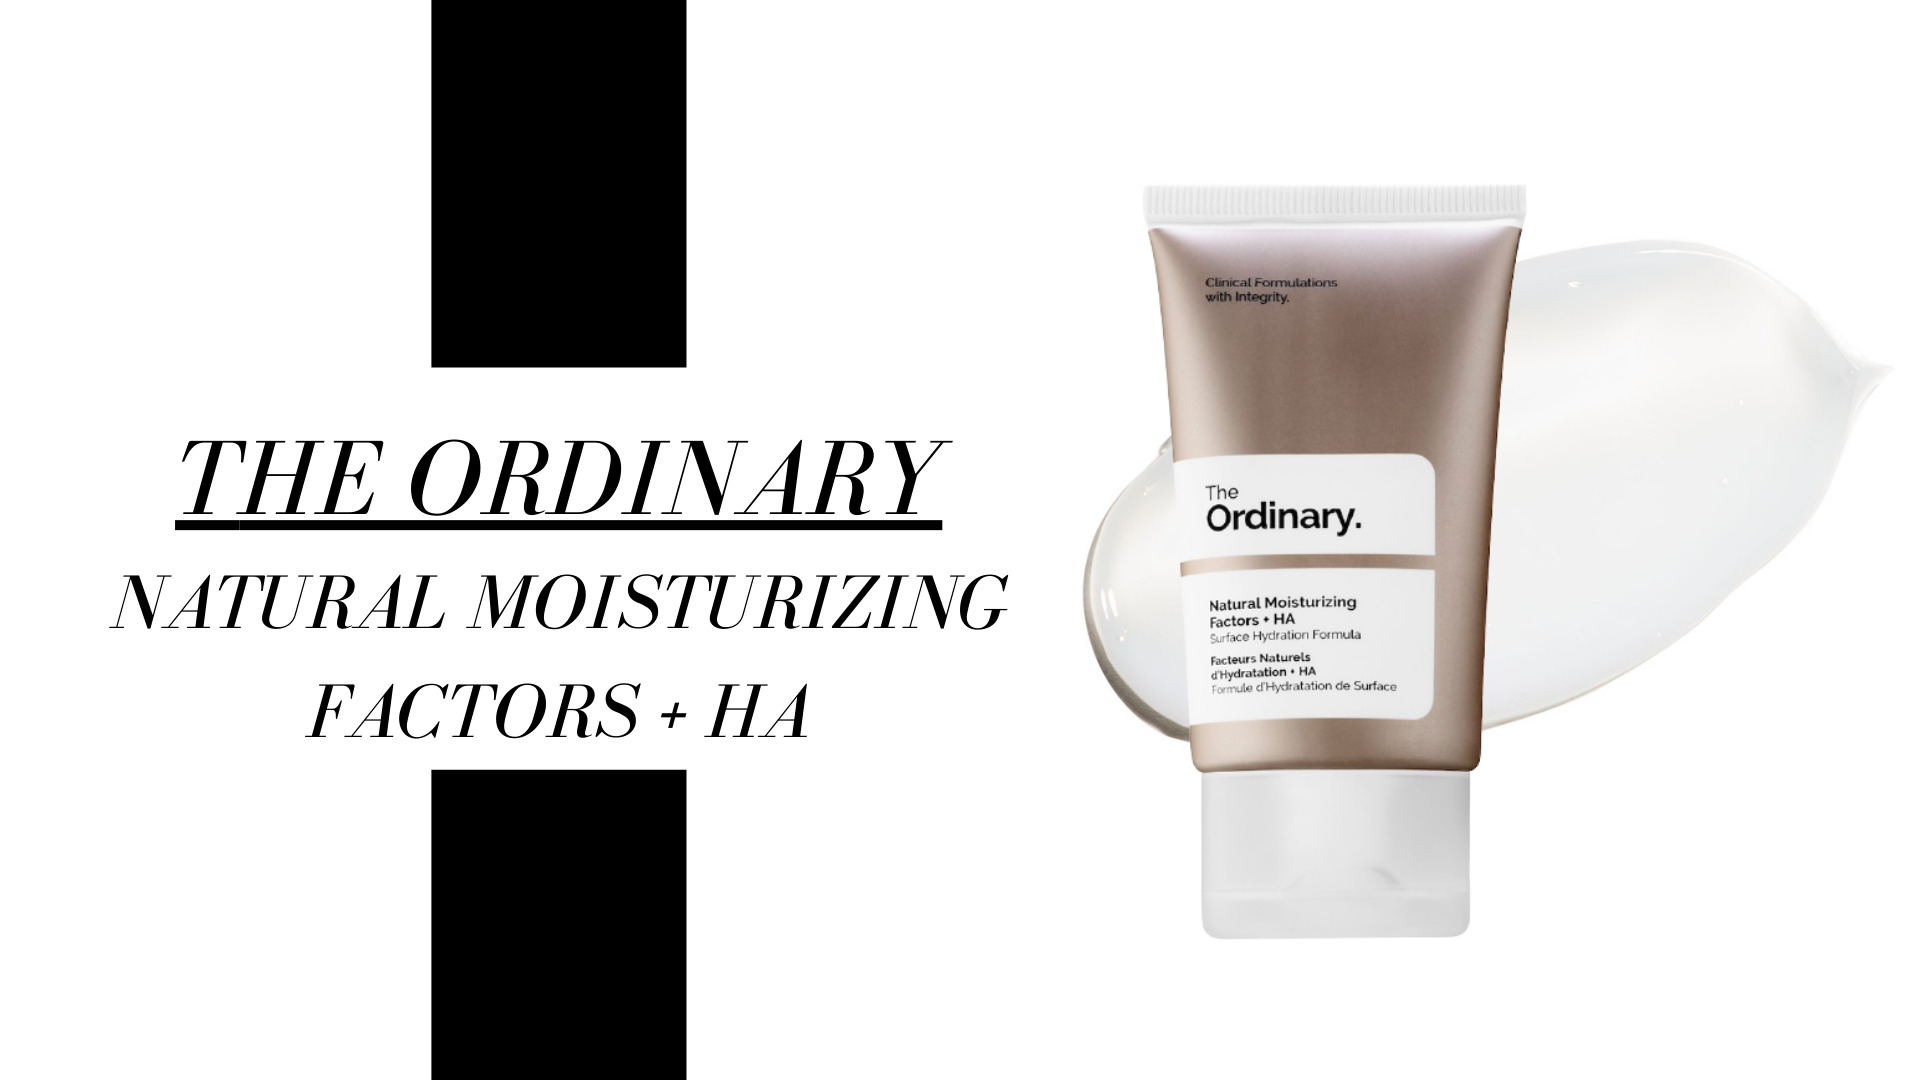 We love and highly recommend this product, as well as, The Ordinary as a brand. In fact, we have raved about this product in so many of our articles that it makes it almost annoying talking about it again.  It is a super affordable (around 10$, isn't that crazy?) and well-made skincare product that you should definitely try! 